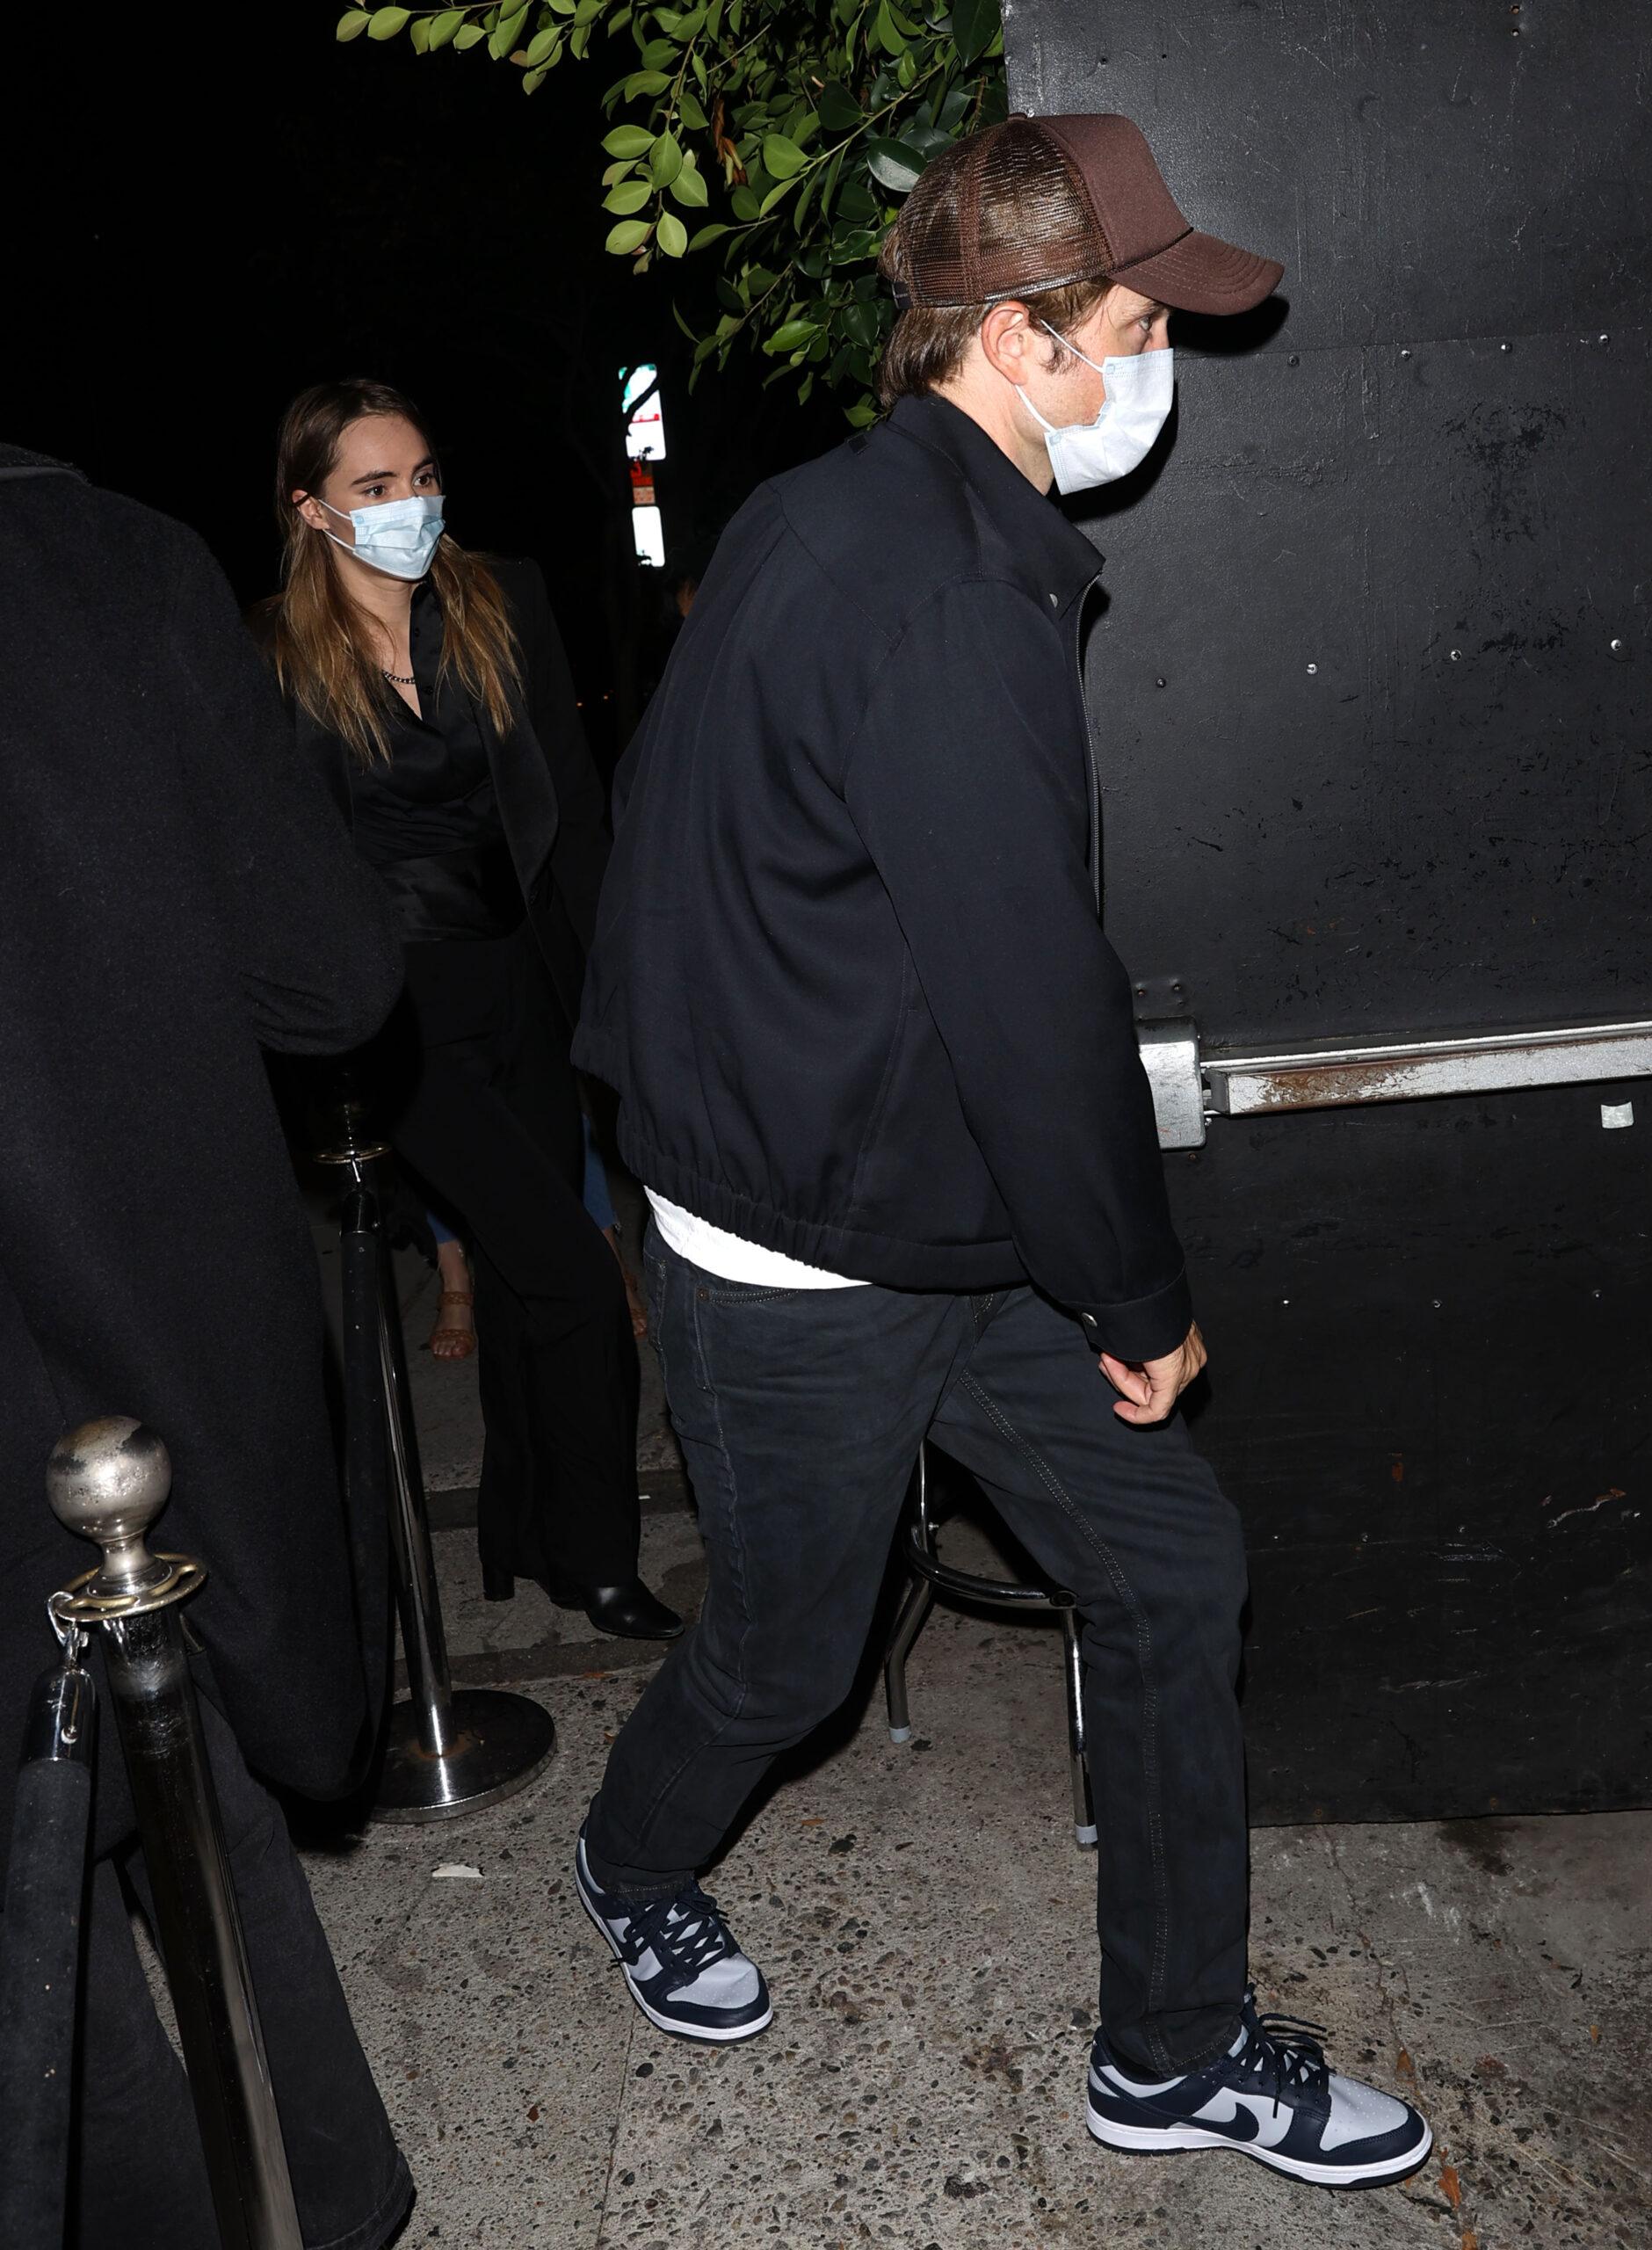 Robert Pattinson and Suki Waterhouse seen arriving at the Viper Room in West Hollywood CA